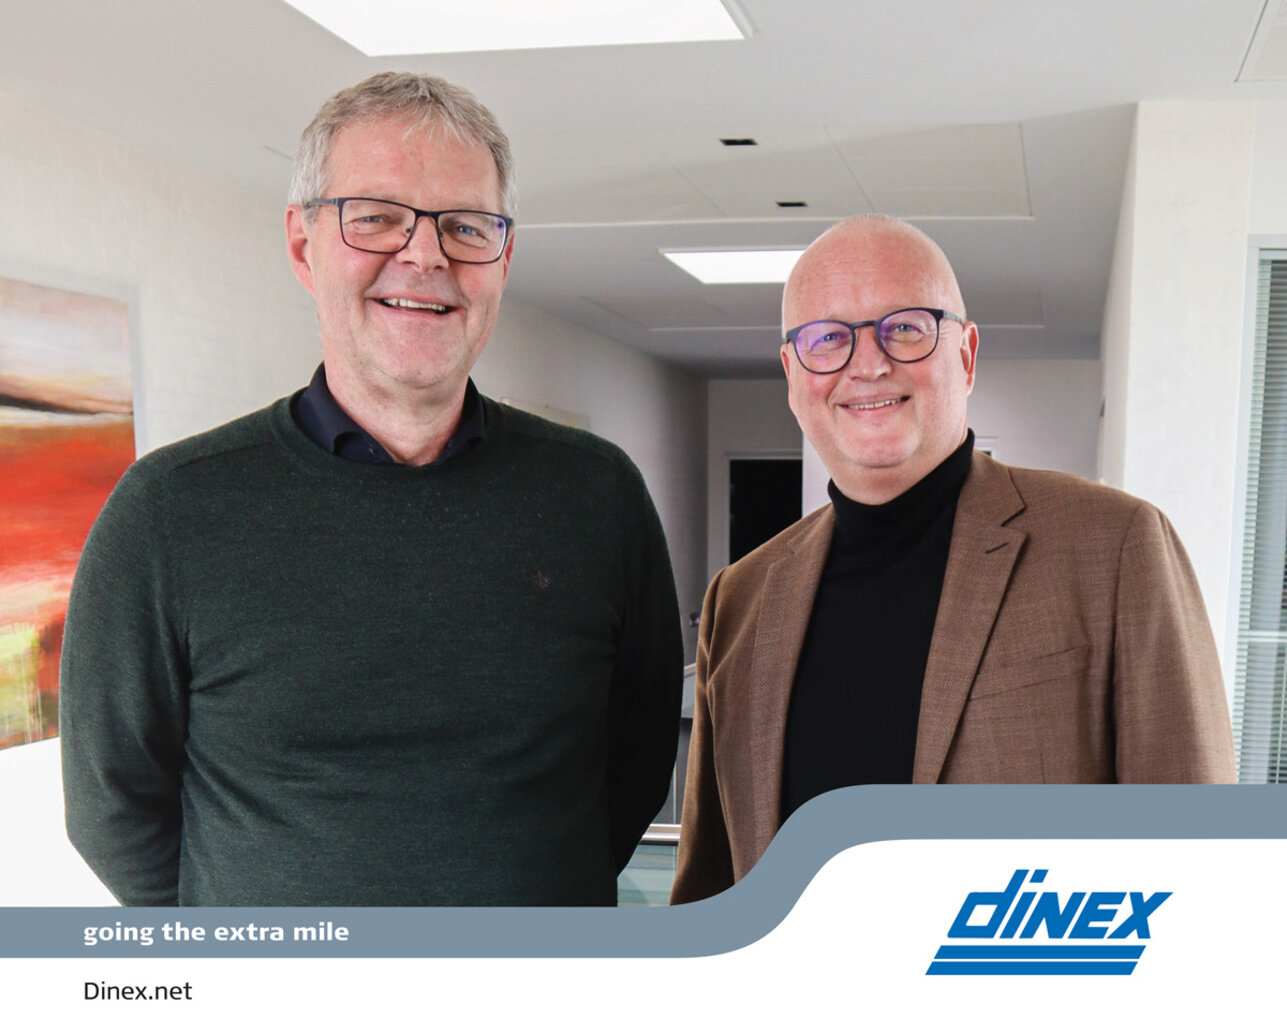 Michael Storm are joining the Dinex Team as CFO